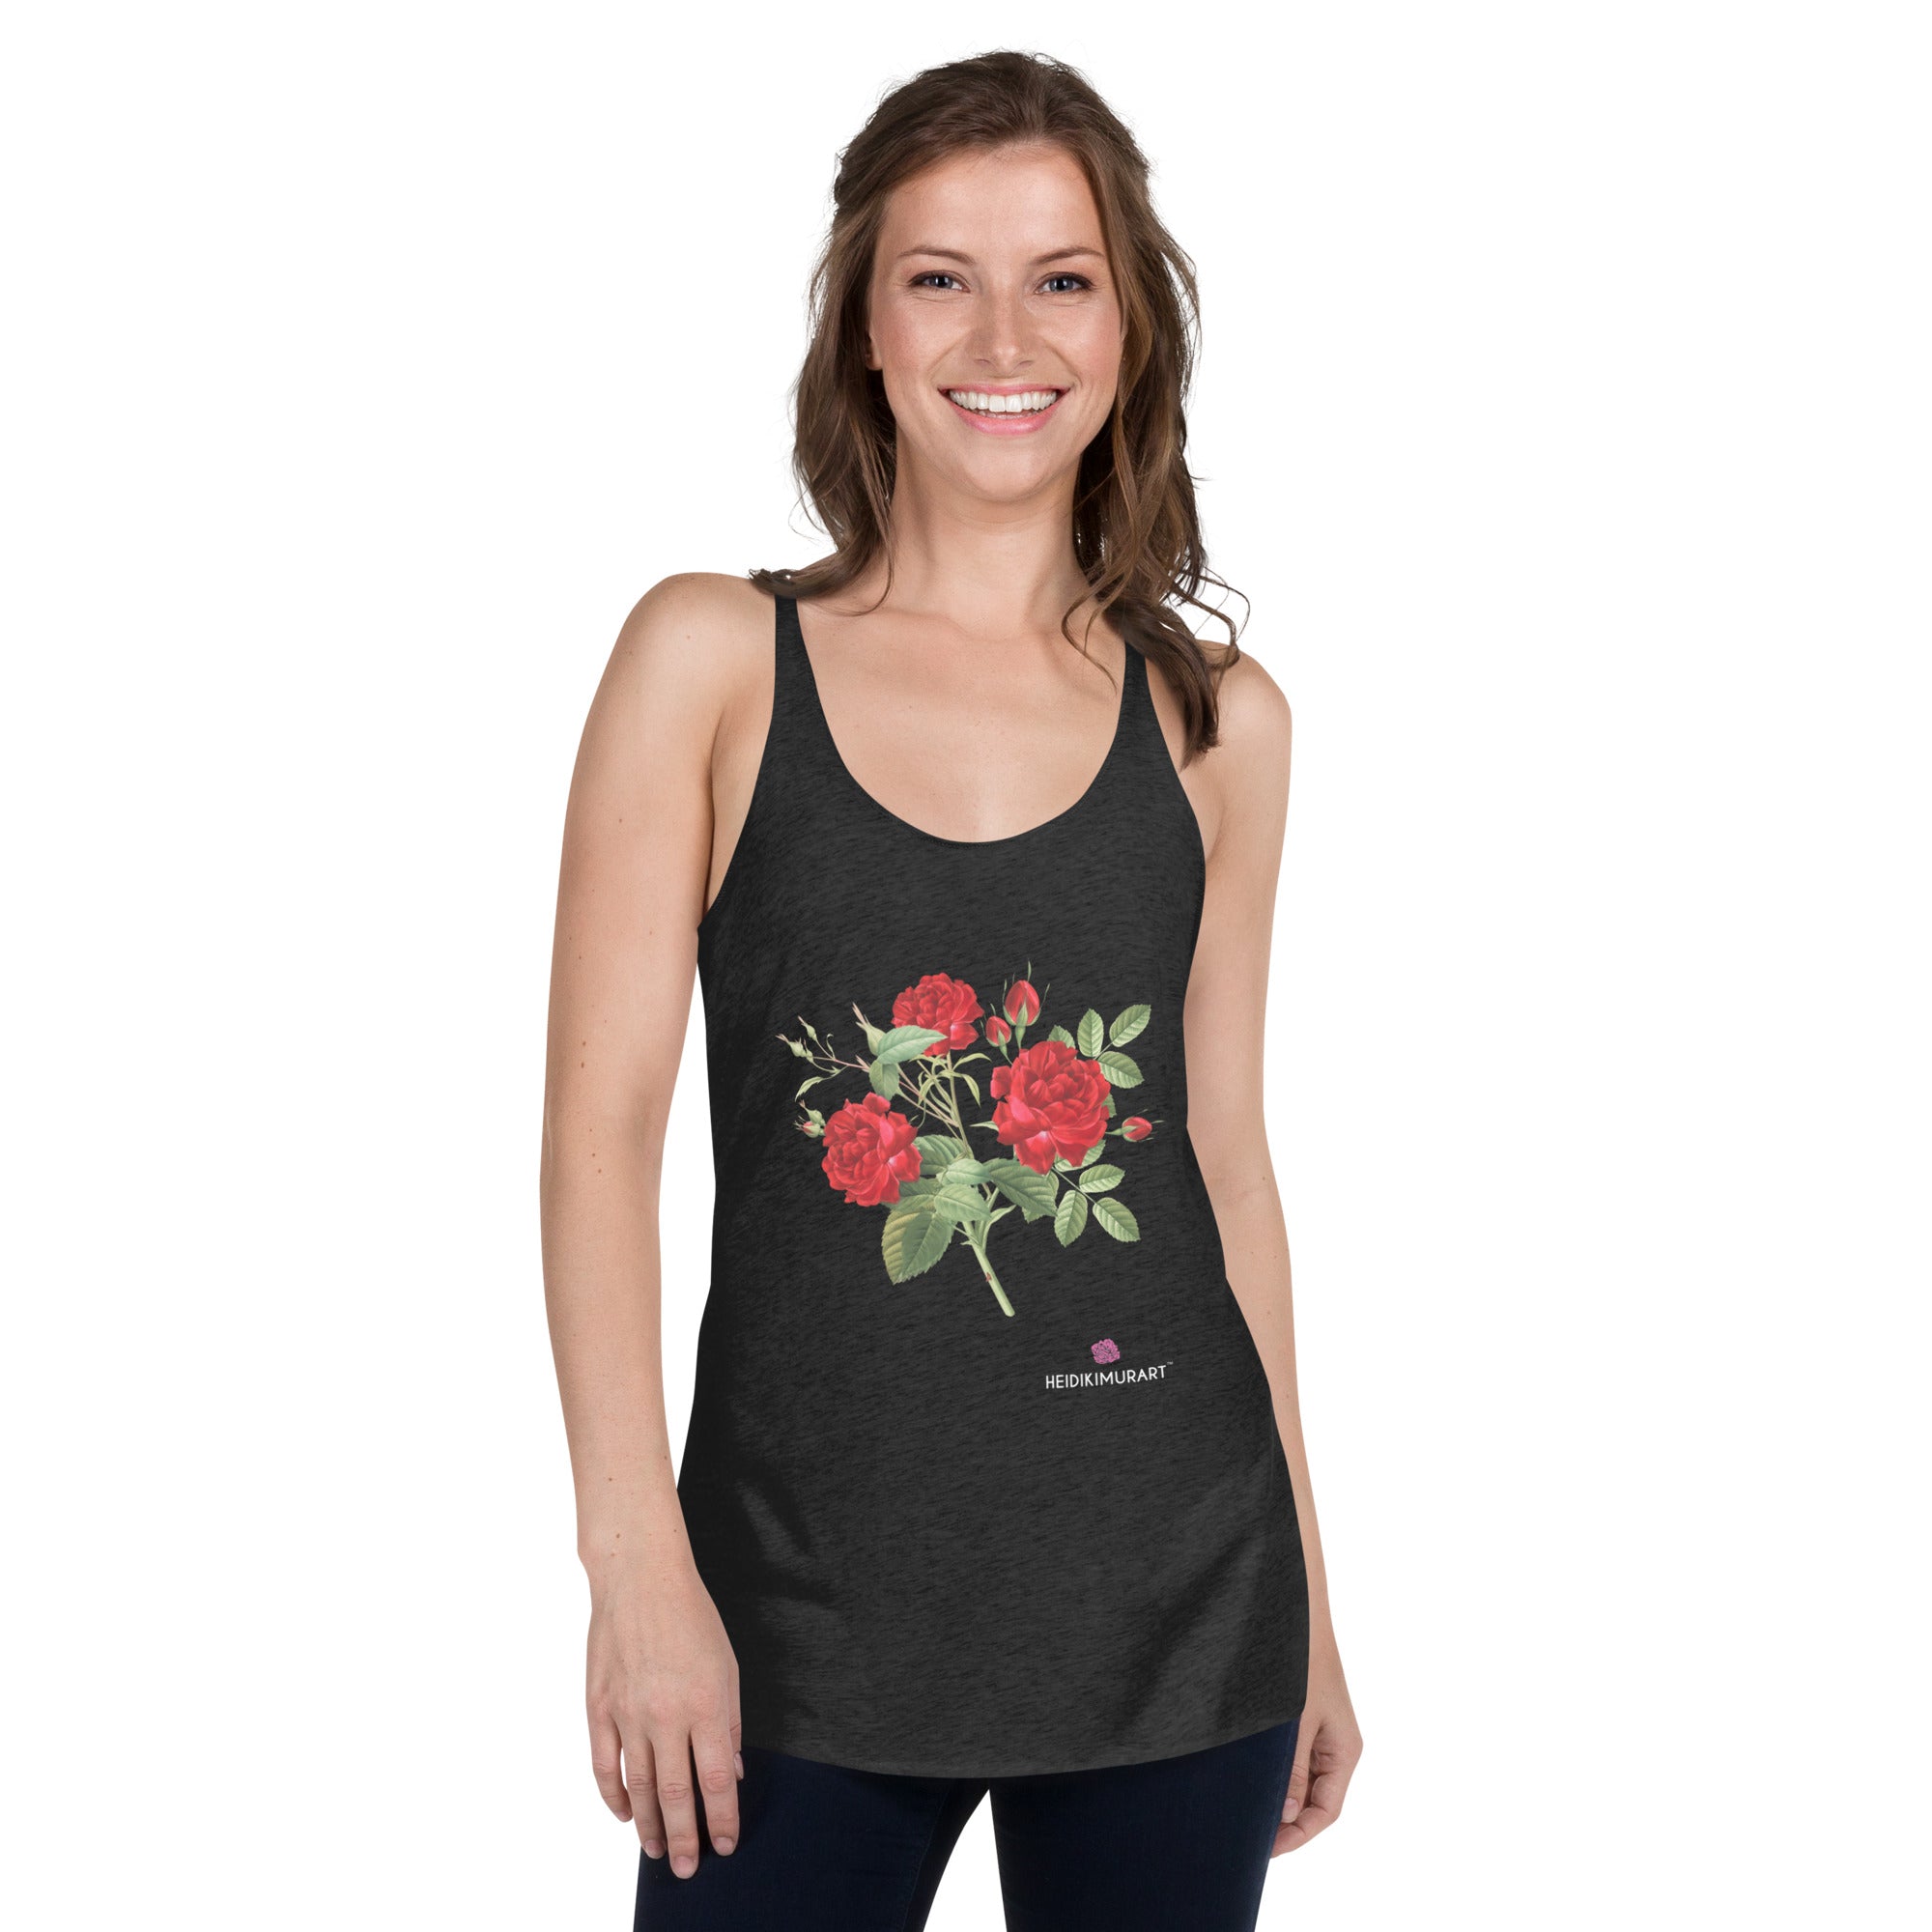 Red Rose Women's Racerback Tank, Red Rose Flower Print Designer Premium Women's Racerback Regular Fit Fitted Soft Crew Neck Best Sporty Tank Top - Printed in USA/Canada/Mexico (US Size: XS-XL)